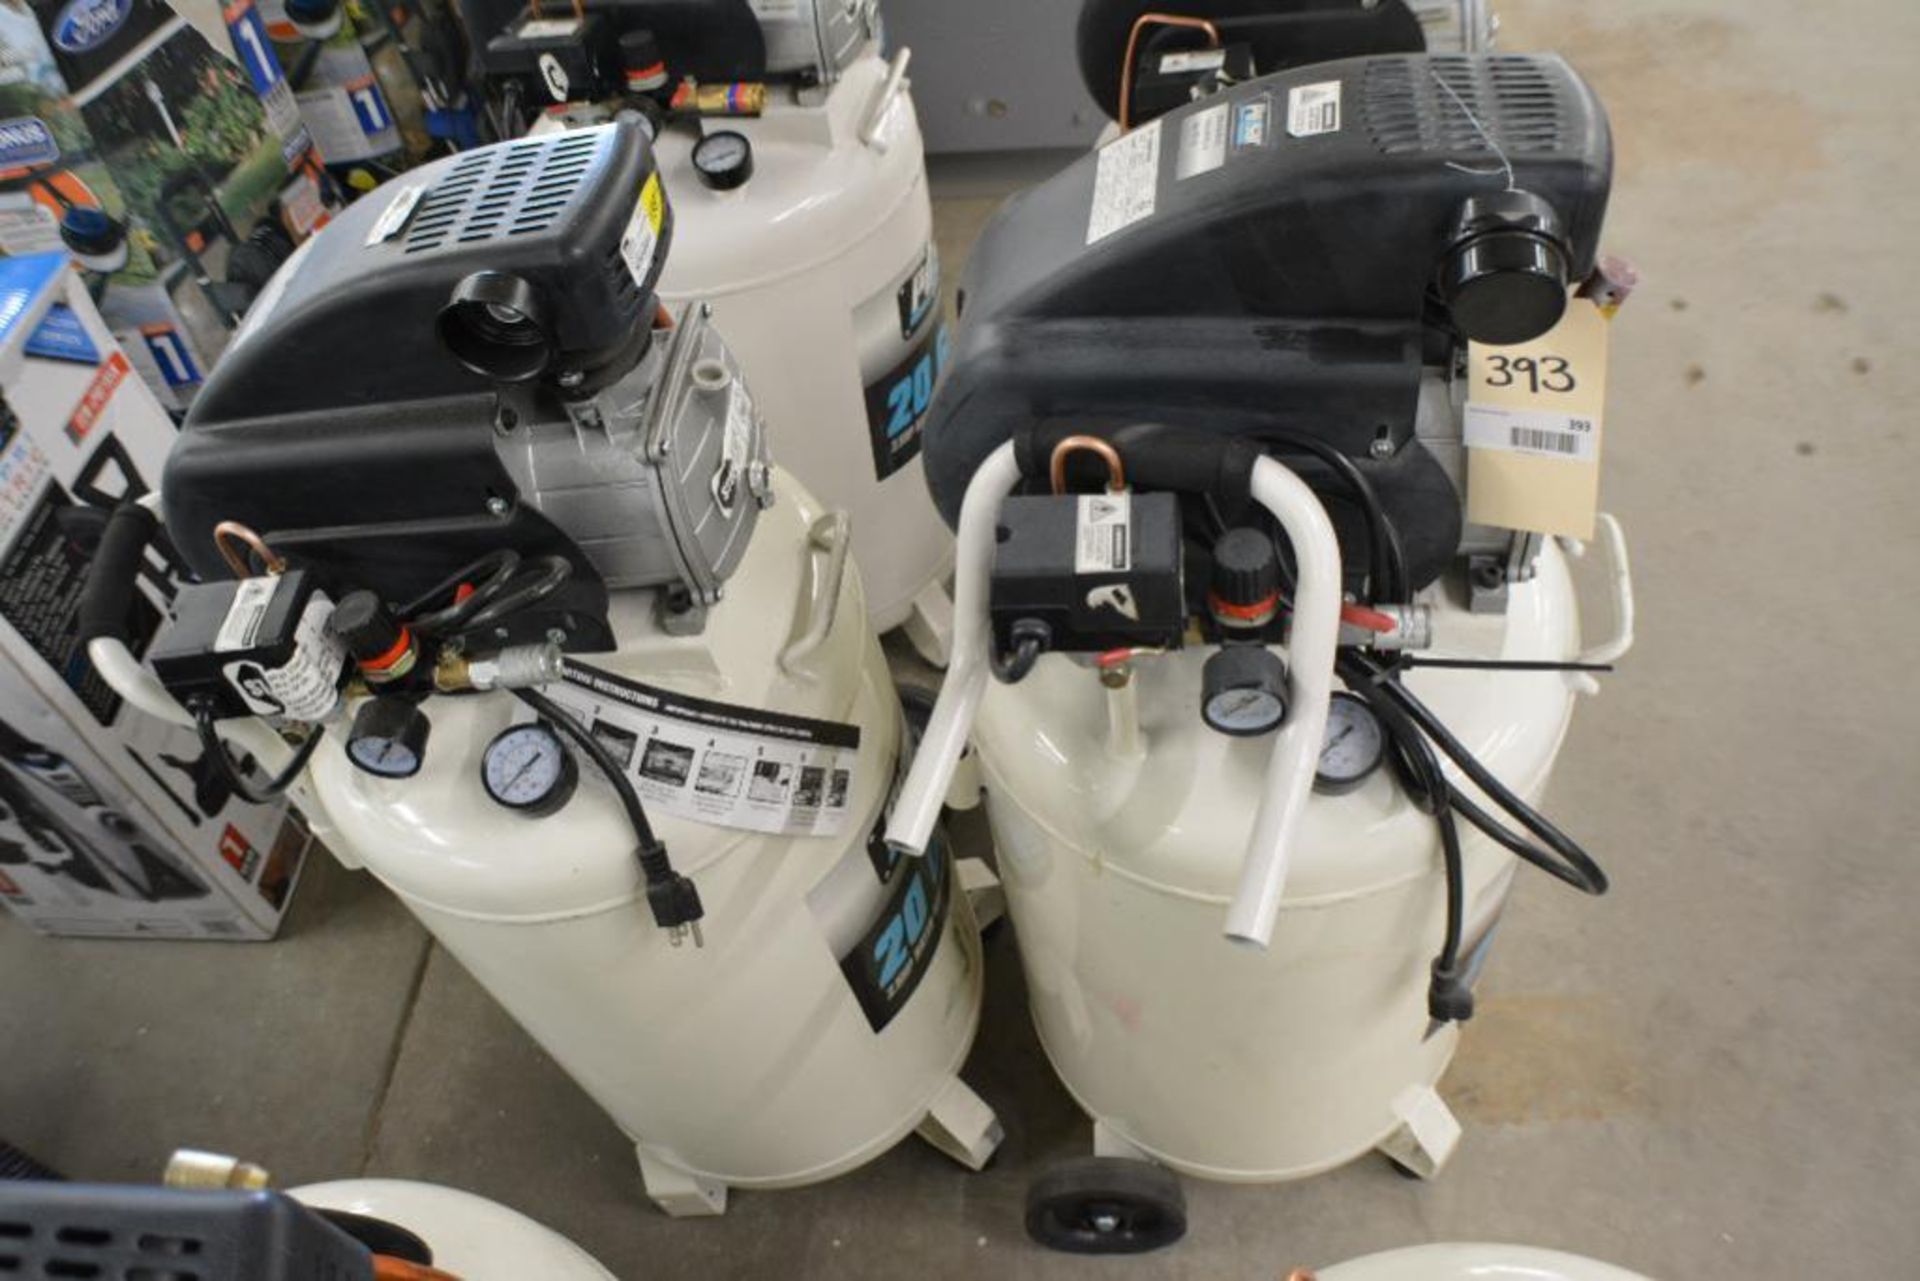 20 Gallon Air Compressor 2.5HP 115PSI by Pulsar. Qty 2 One Lot